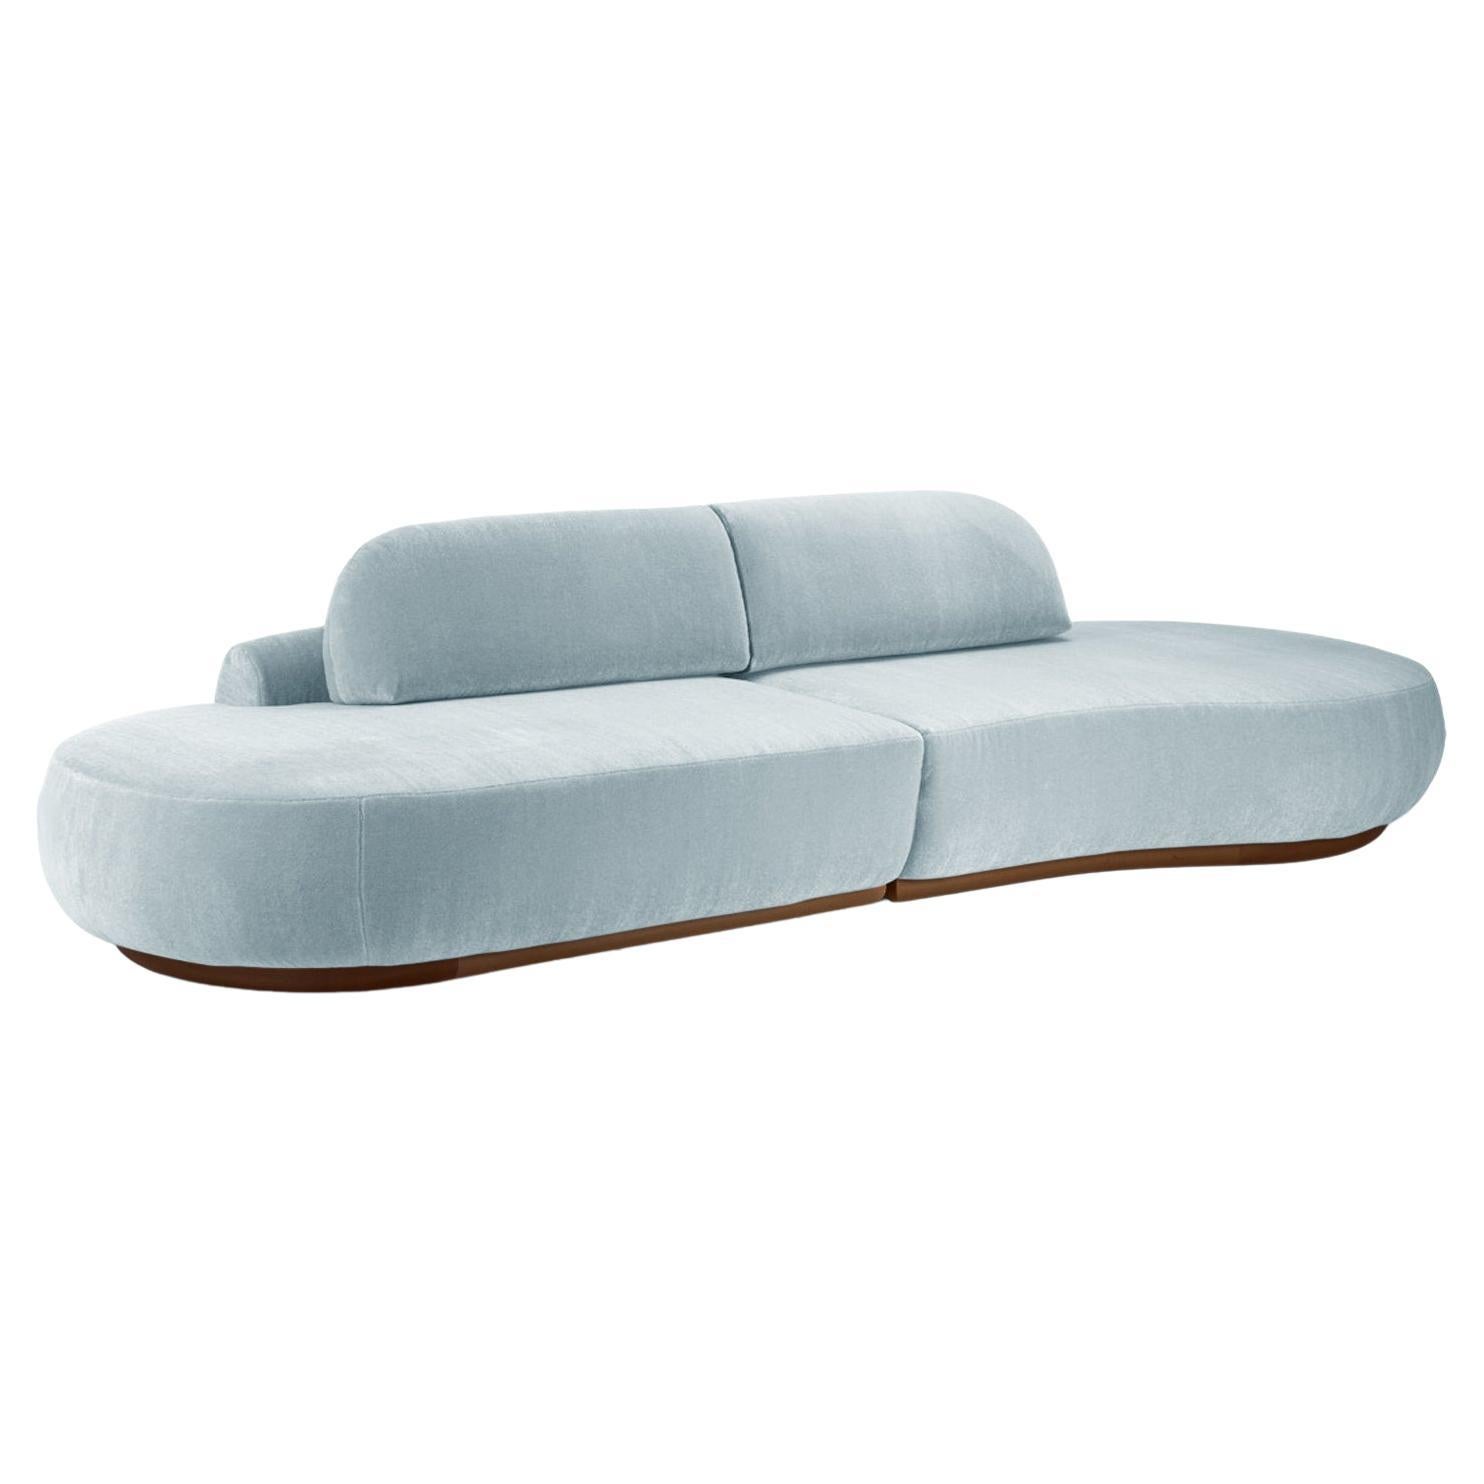 Naked Curved Sectional Sofa, 2 Piece with Beech Ash-056-1 and Paris Safira For Sale